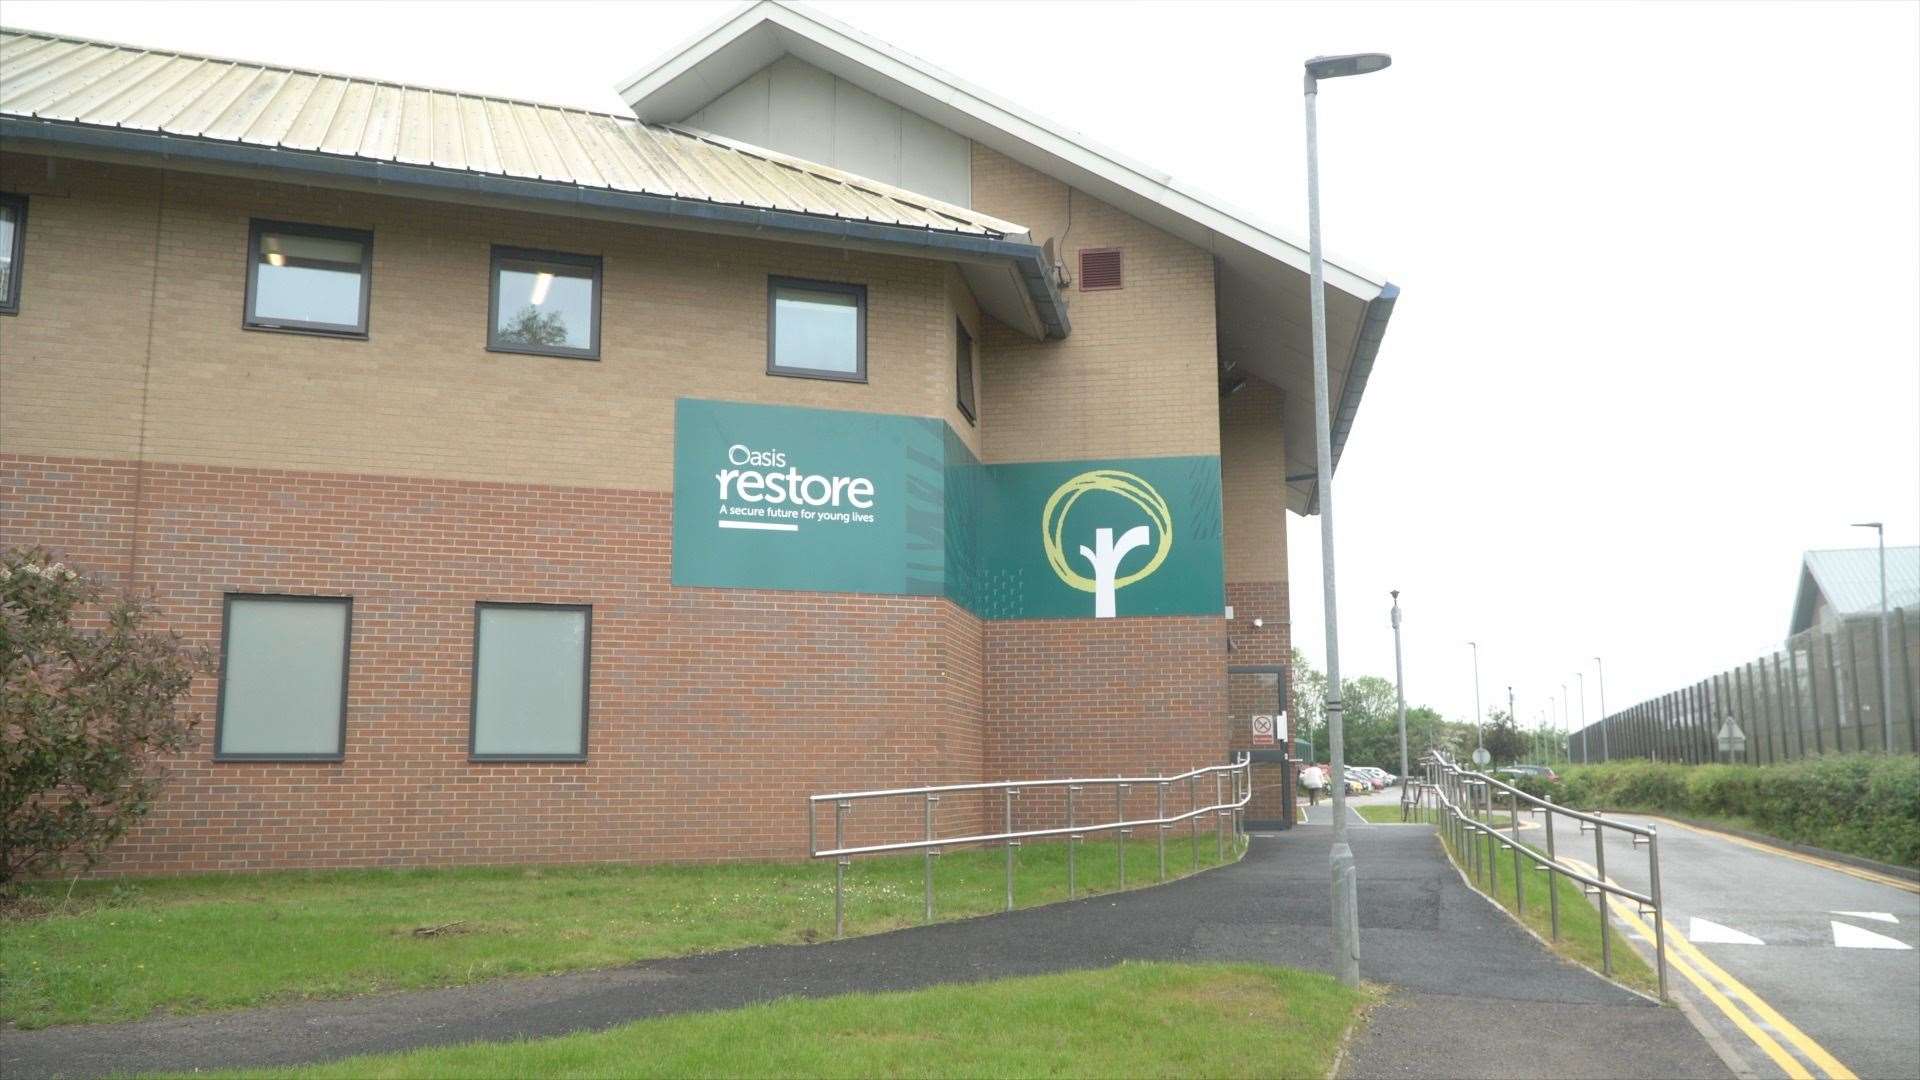 Oasis Restore in Rochester, a secure school for young offenders. Picture: KMTV